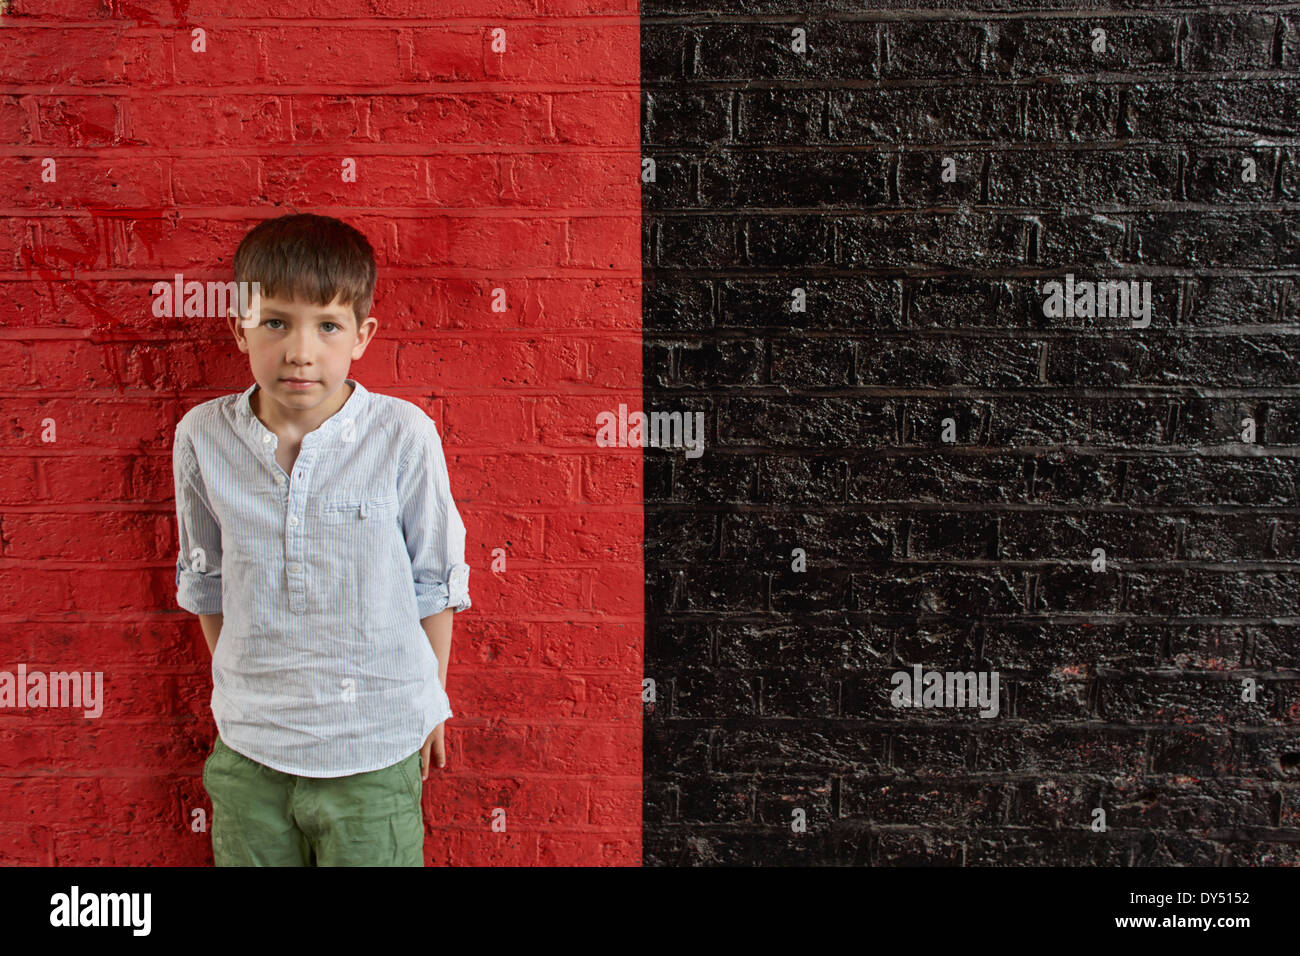 Boy against red and black wall Stock Photo